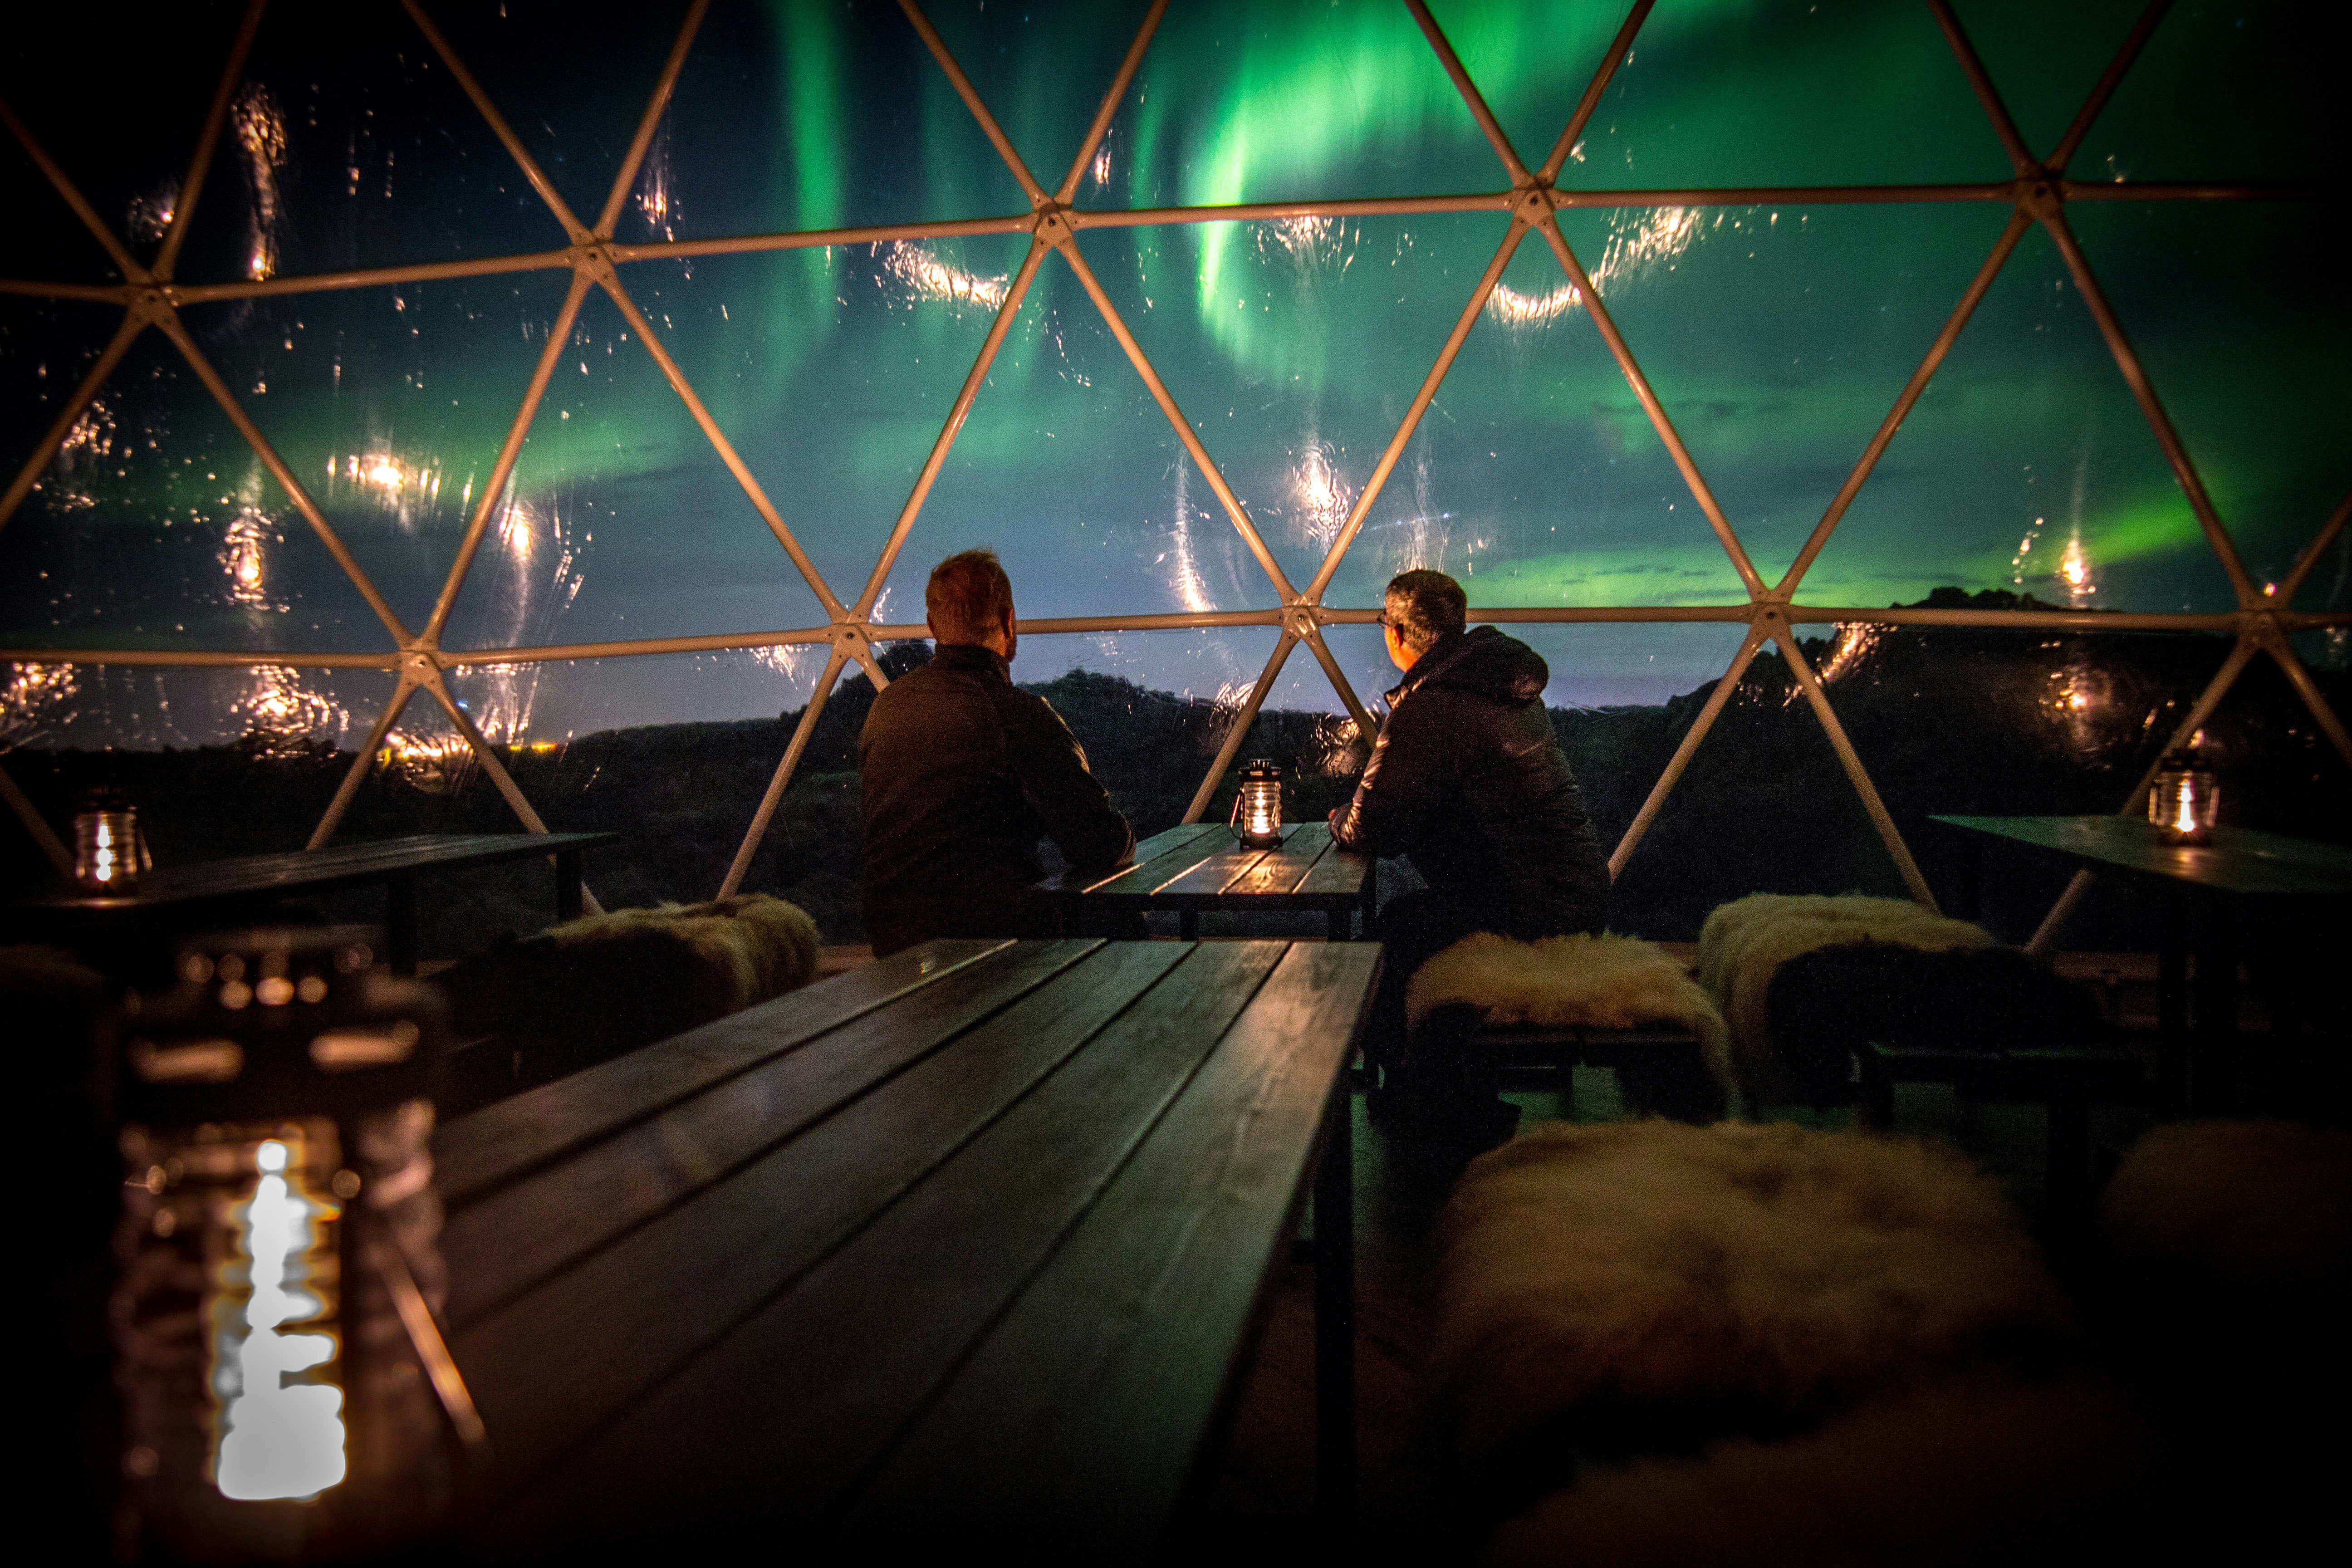 People view the Northern Lights from the cosy confines of a cabin